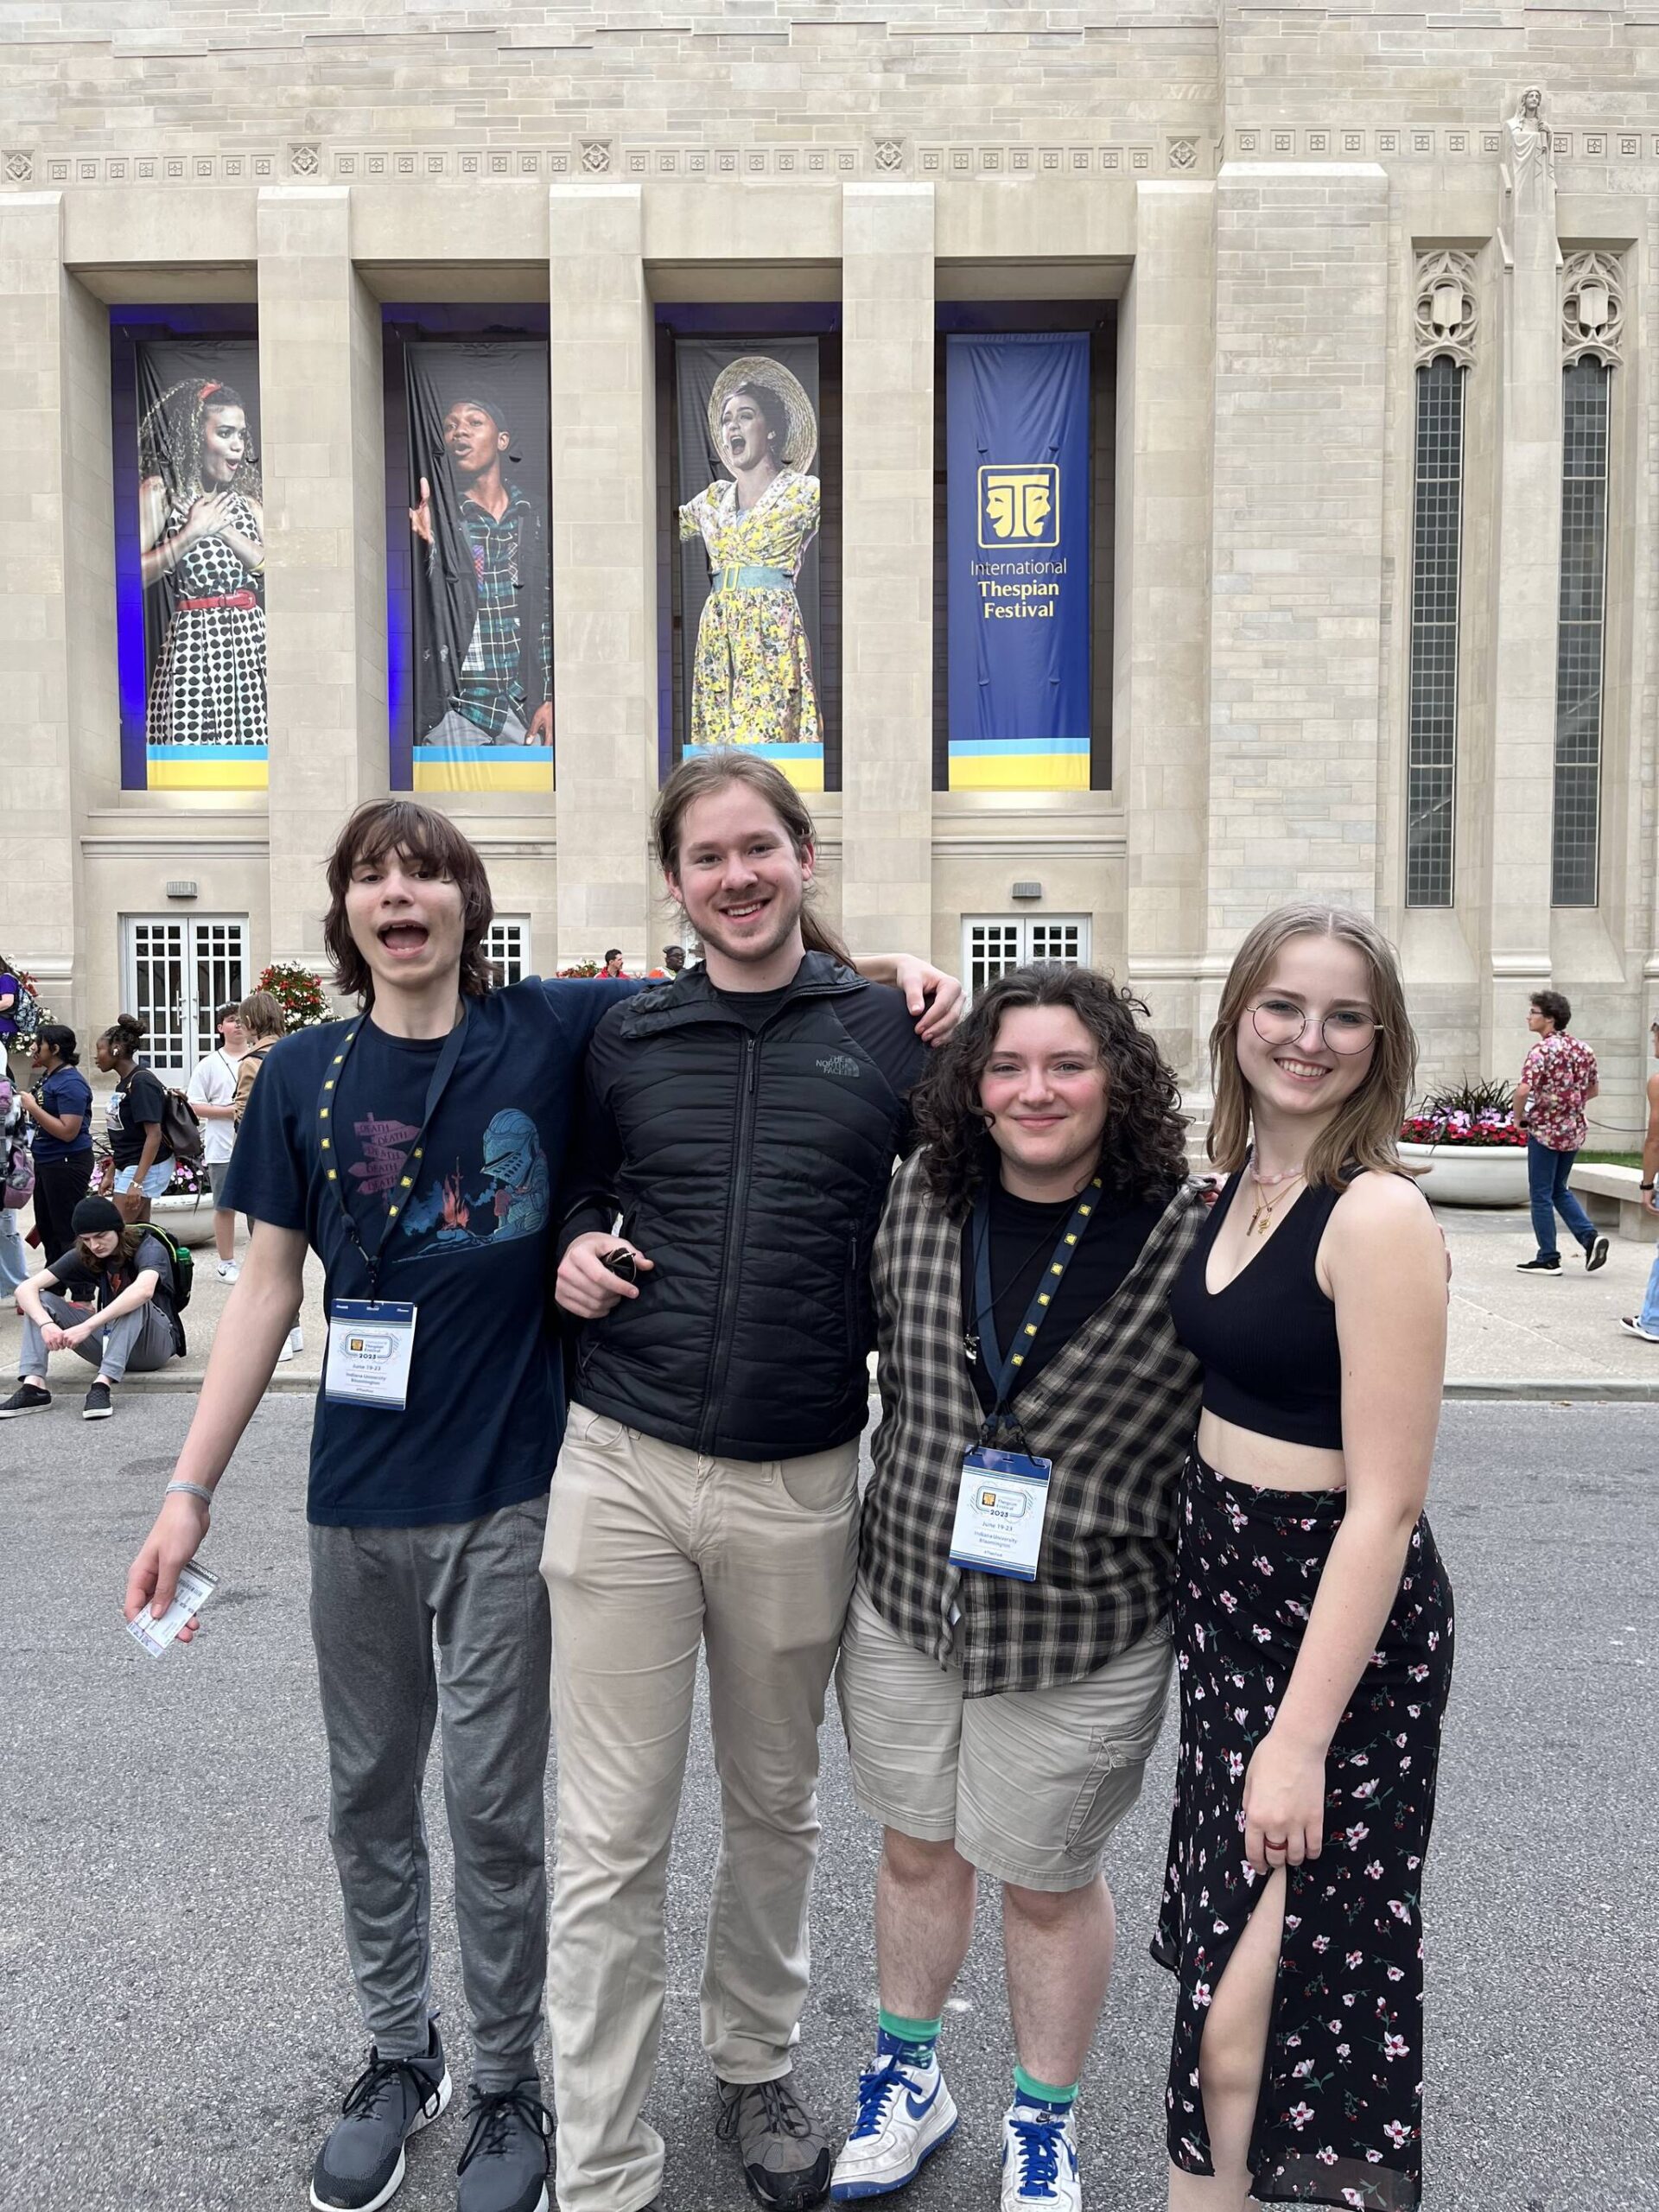 Mercer Island High School’s Greg Chvany, Alec Martin, Milo Mechem-Miller and Annabel Rimmer attended the International Thespian Festival from June 19-23 in Bloomington, Indiana. Courtesy photo